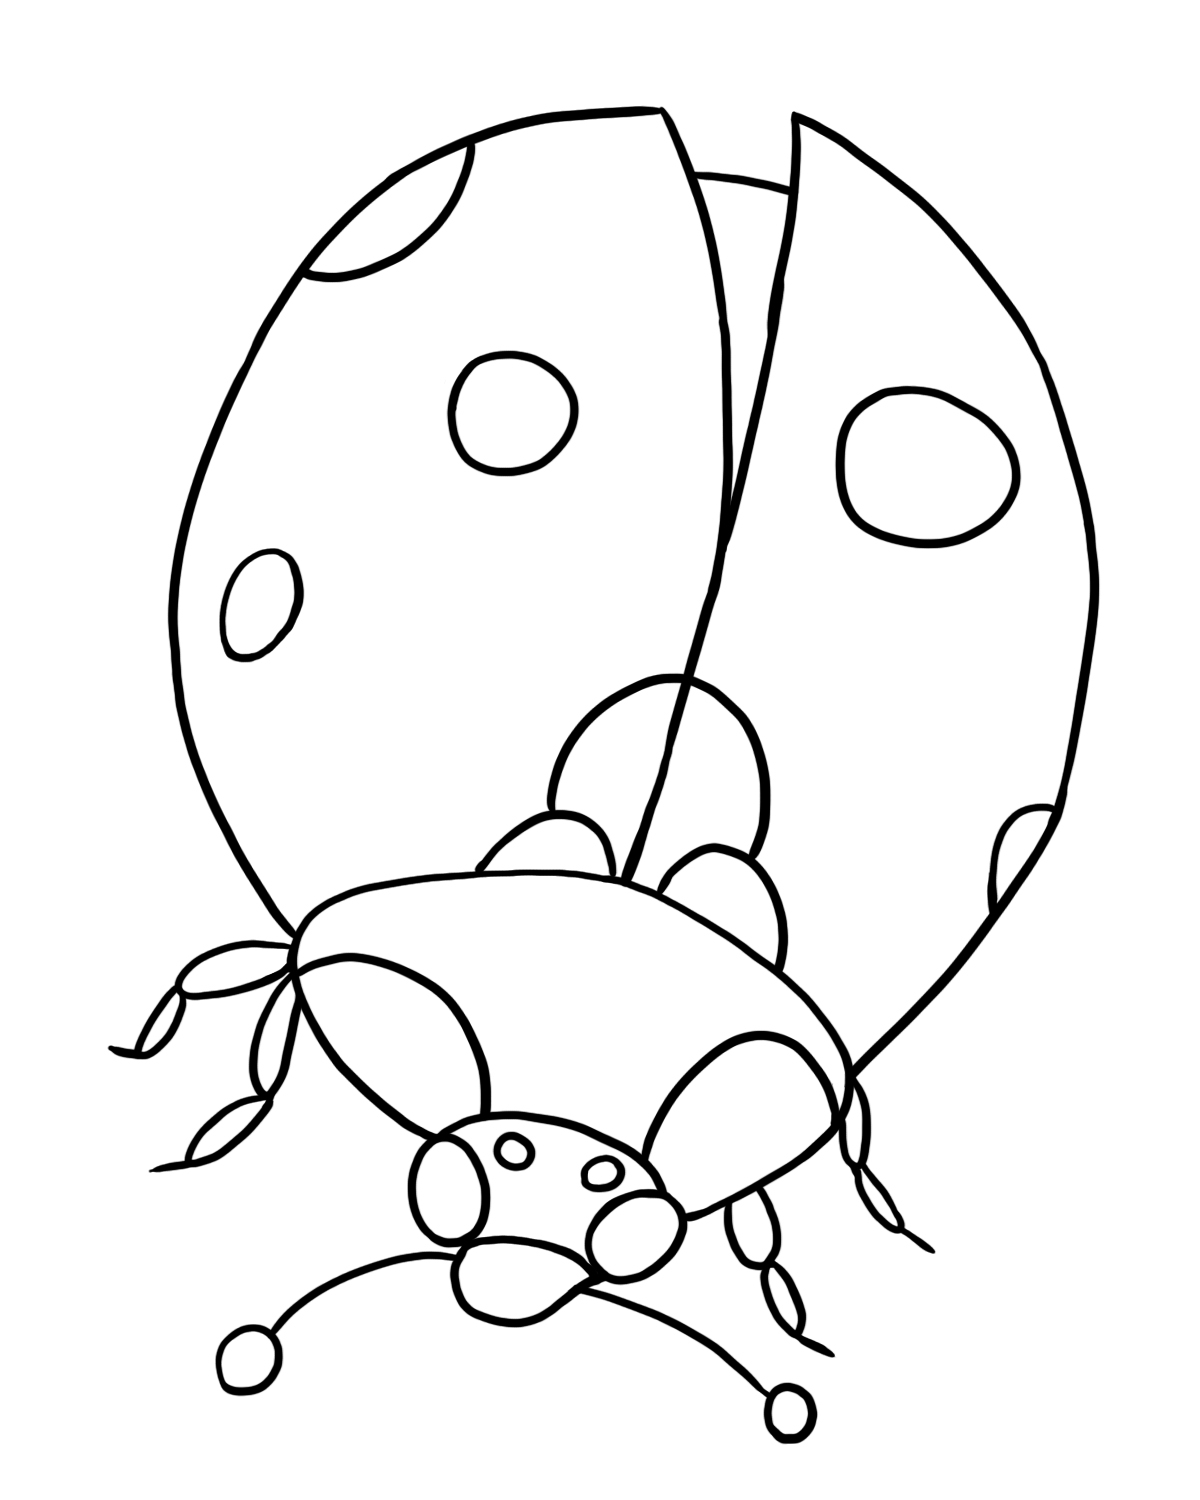 Free Printable Ladybug Coloring Pages For Kids